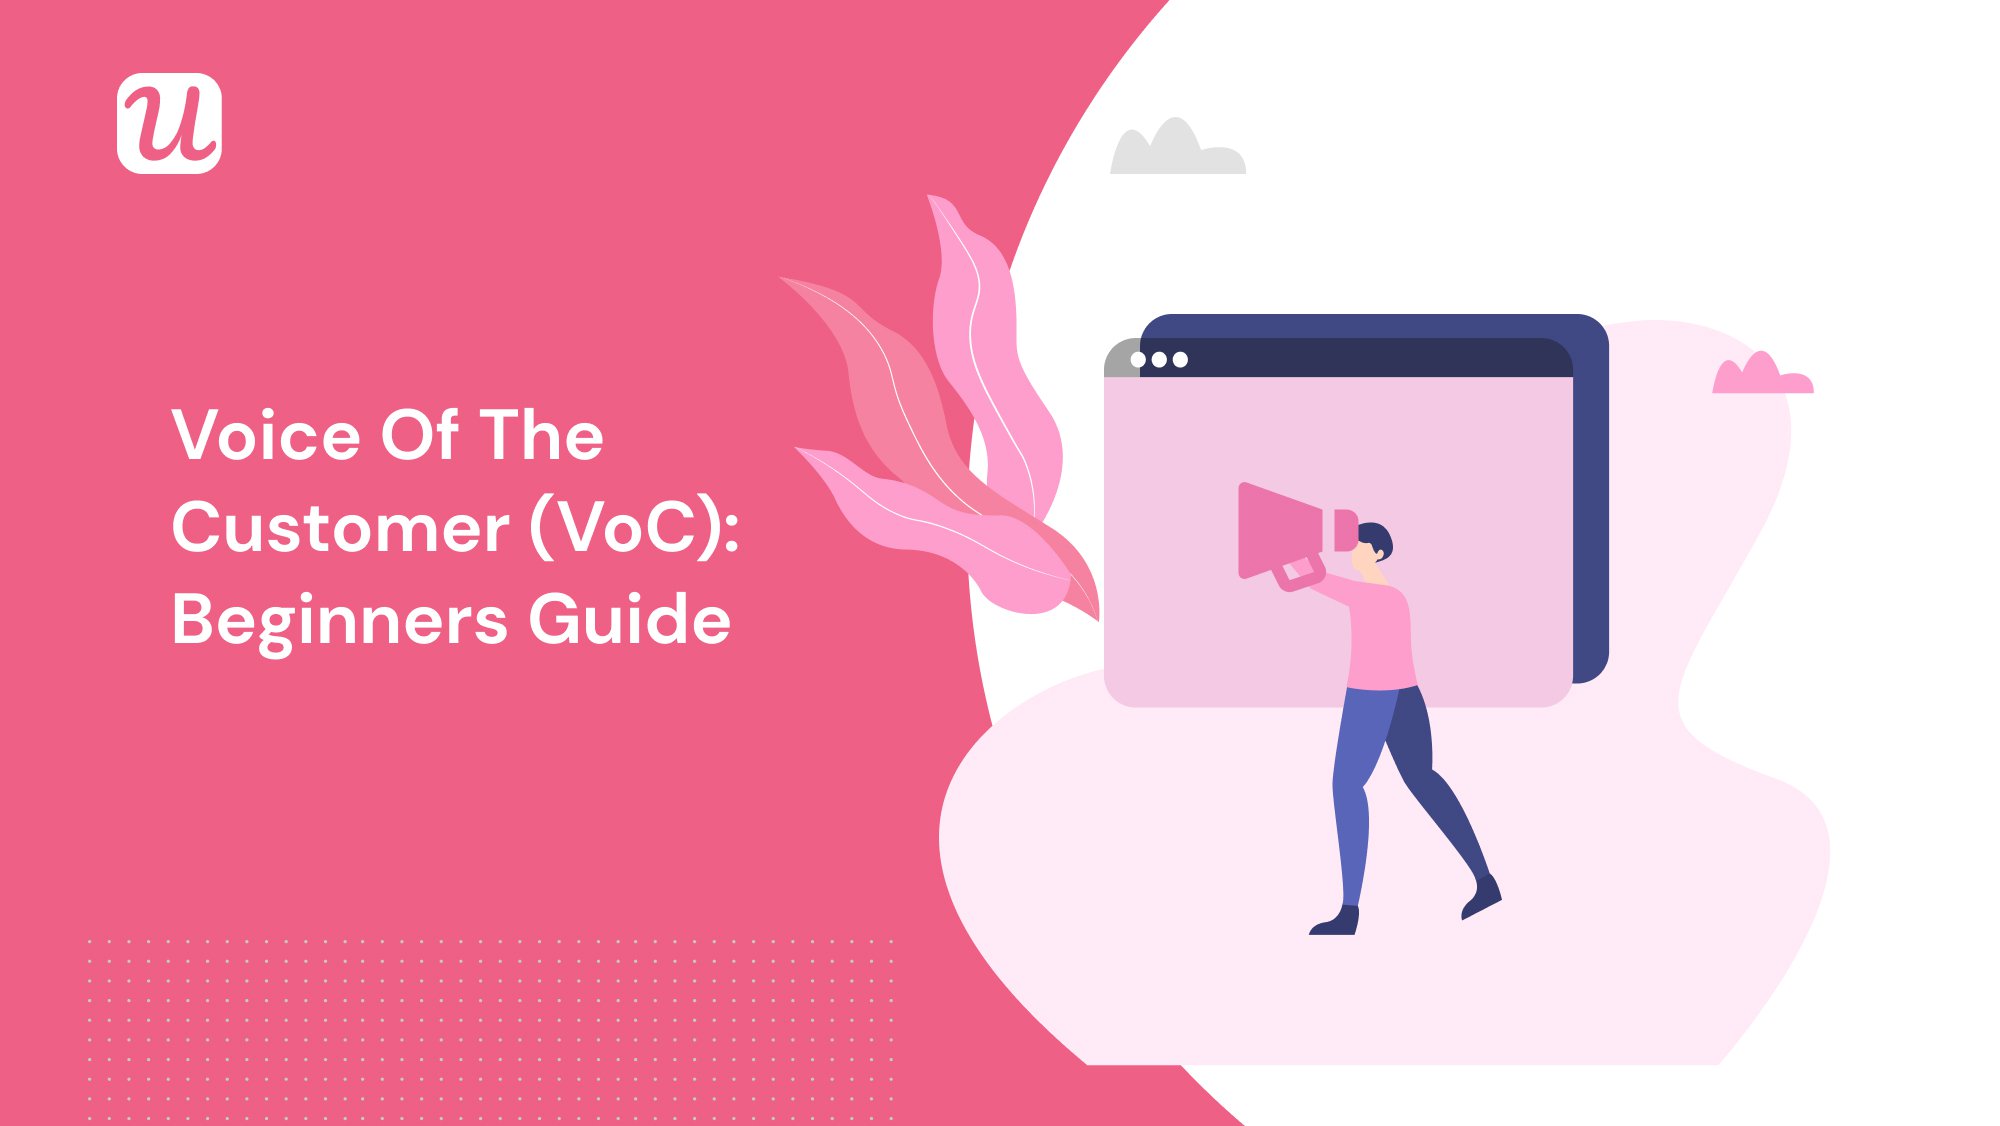 Voice of the Customer (VoC): Beginners Guide on How to Collect Data Plus Best Practices